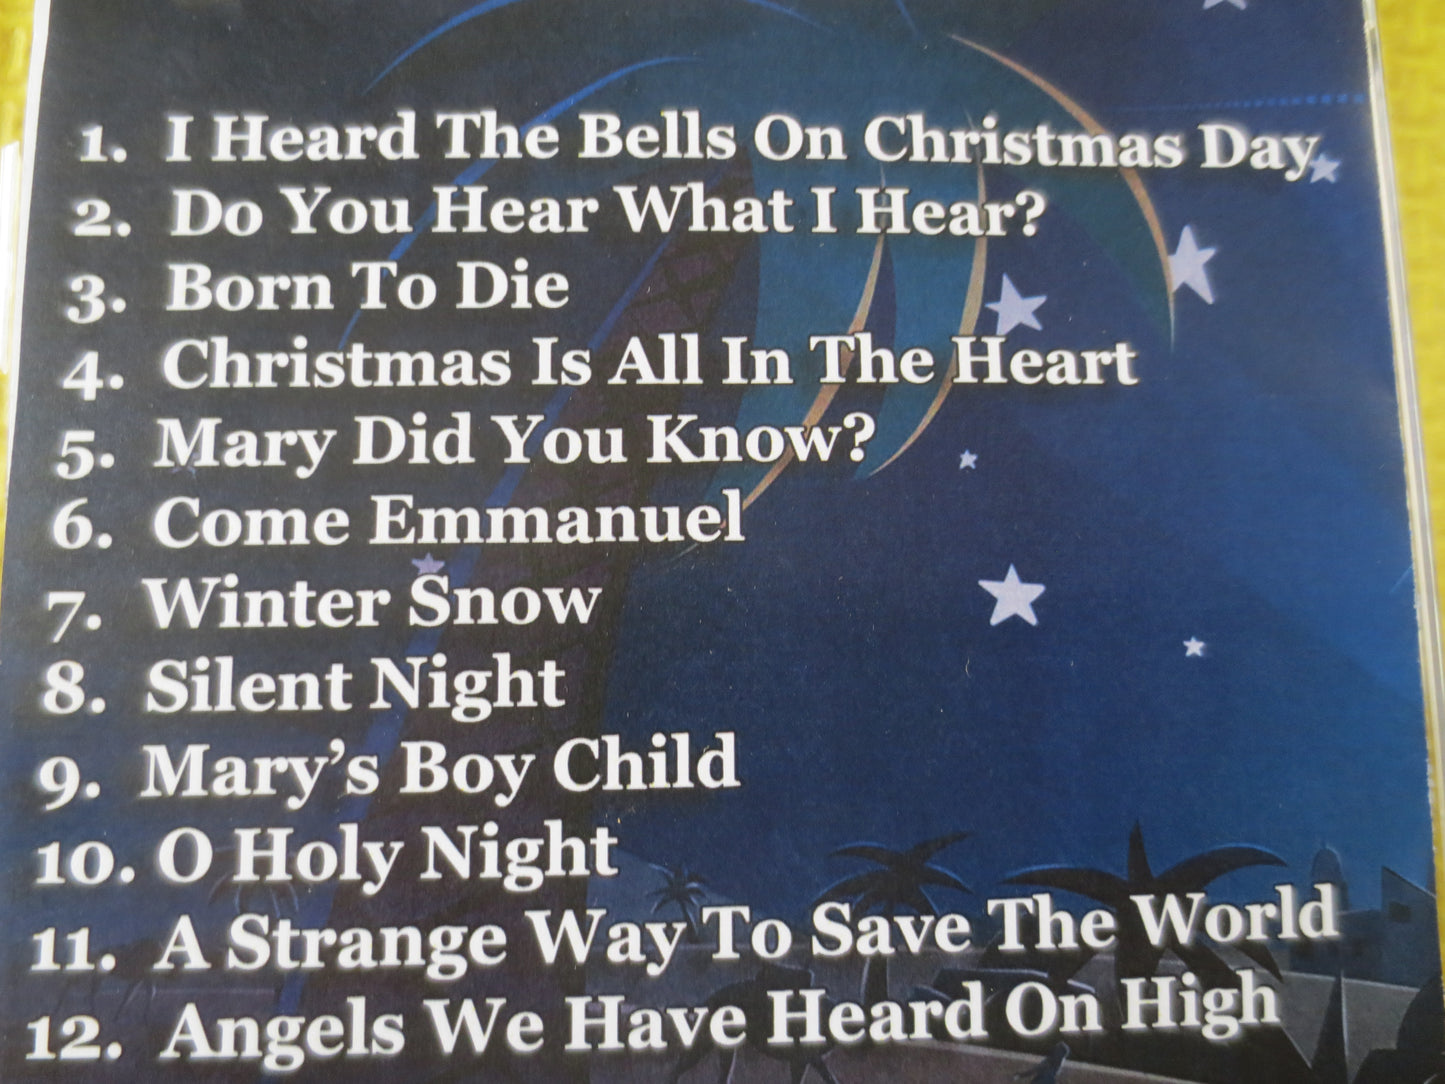 HOLY FAMILY, Life Teen Band, CHRISTMAS Music, Christmas Tunes, Christmas Songs, Christmas Hymns, Music Cds, cds, Compact Discs